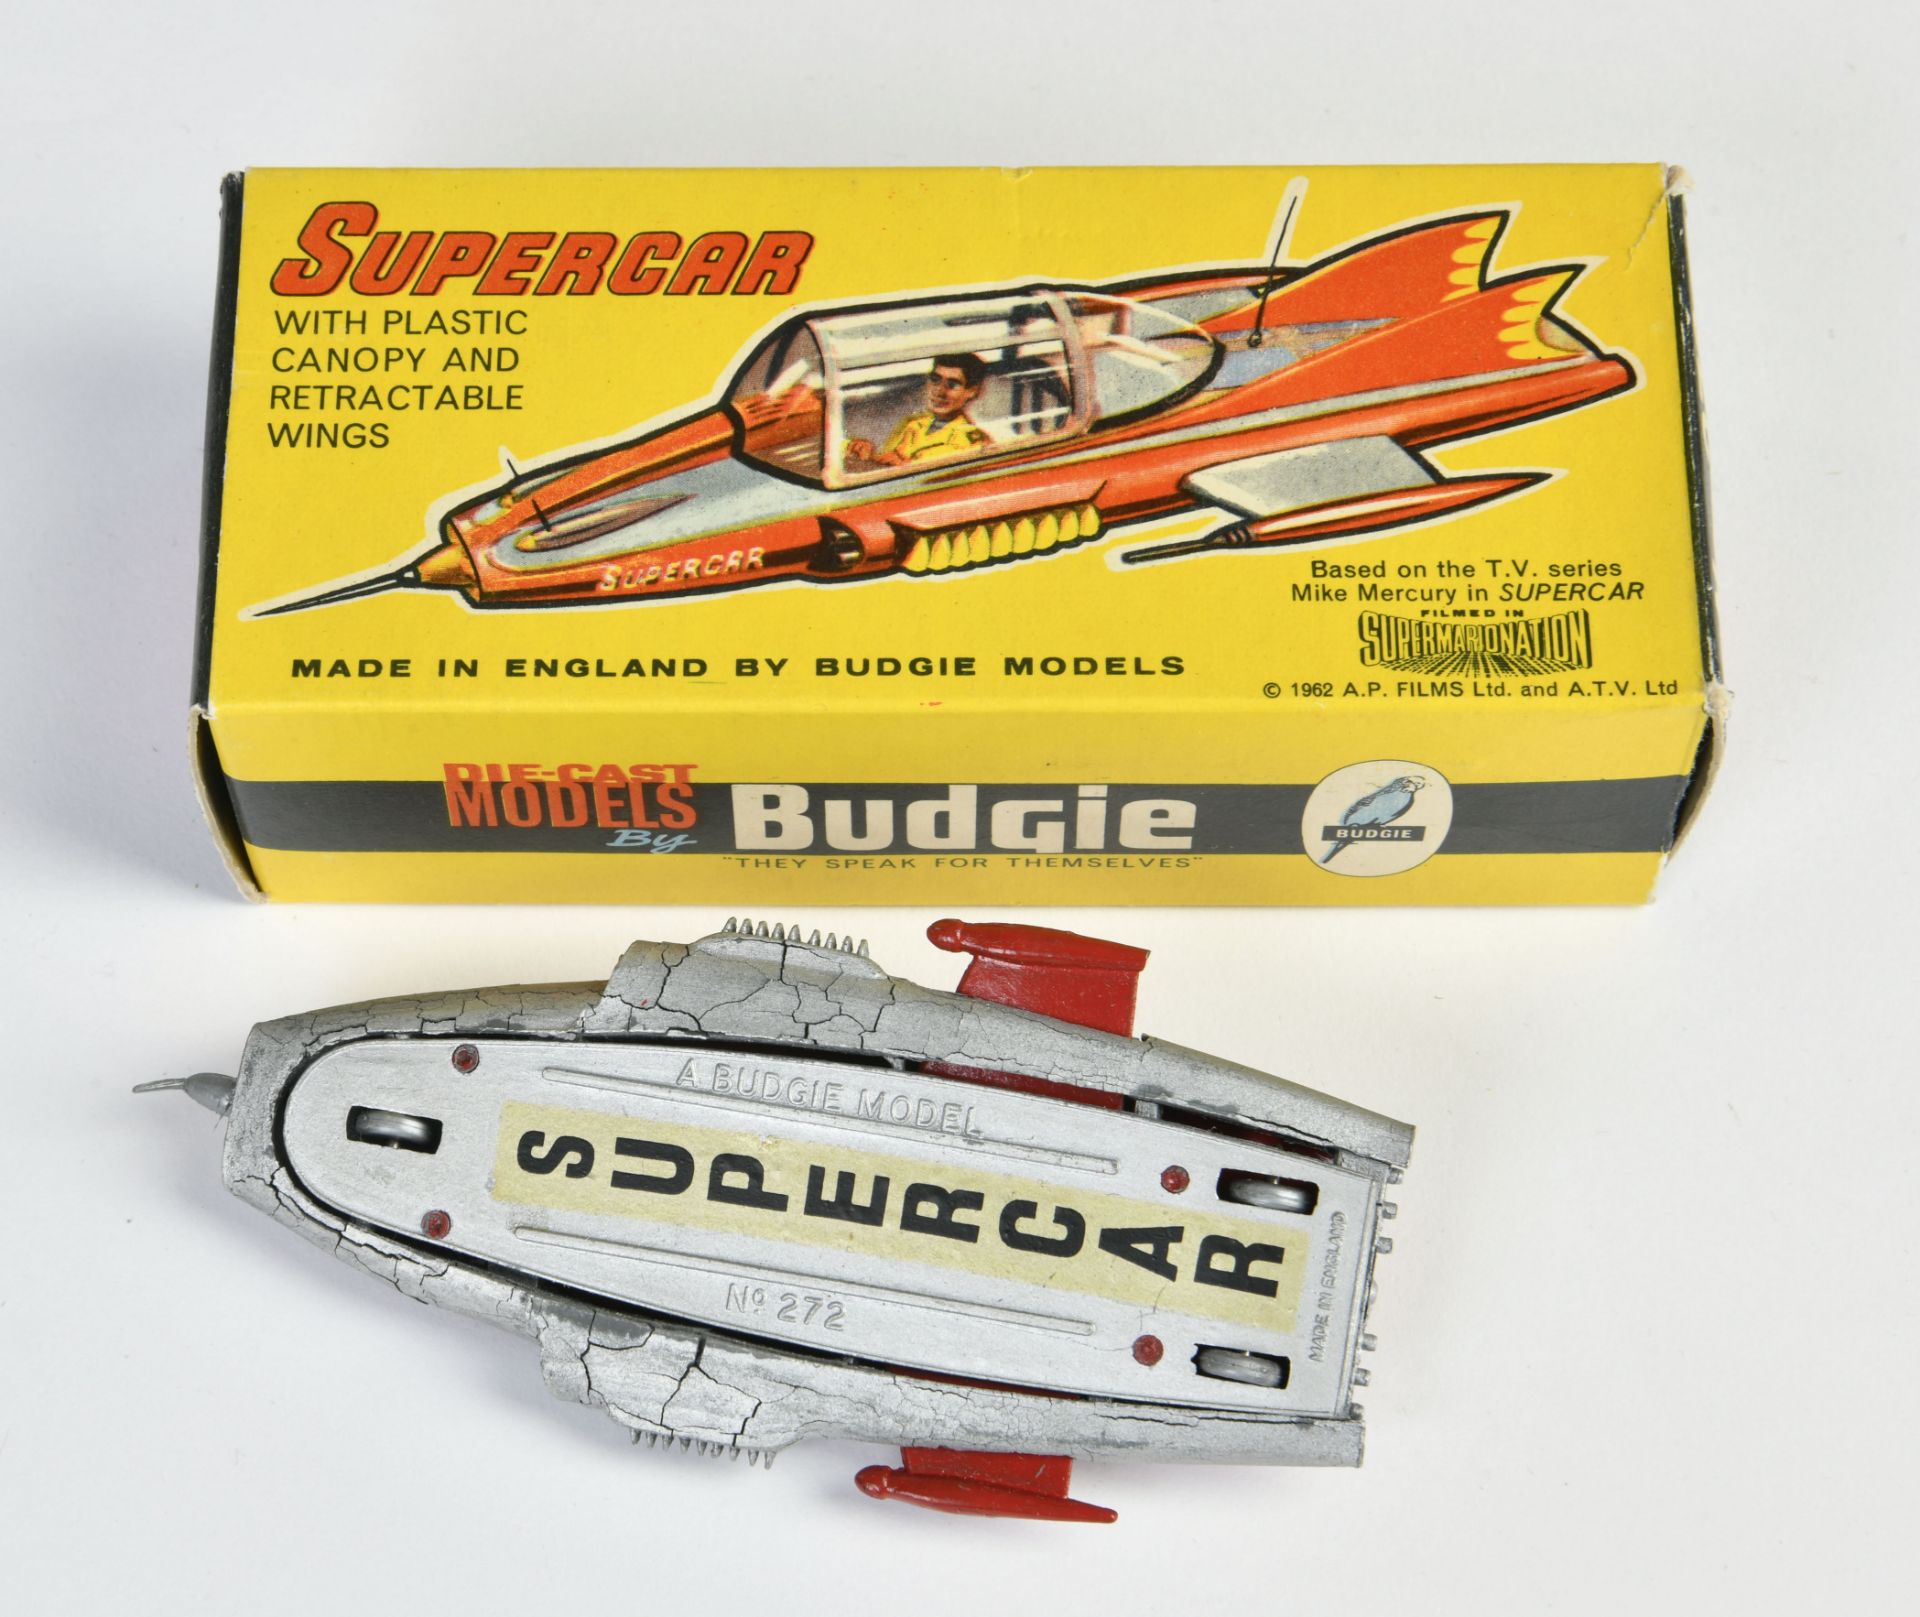 Budgie, Supercar 272, England, 1:43, diecast, damaged due to Zinkpest, box very good condition - Image 2 of 2